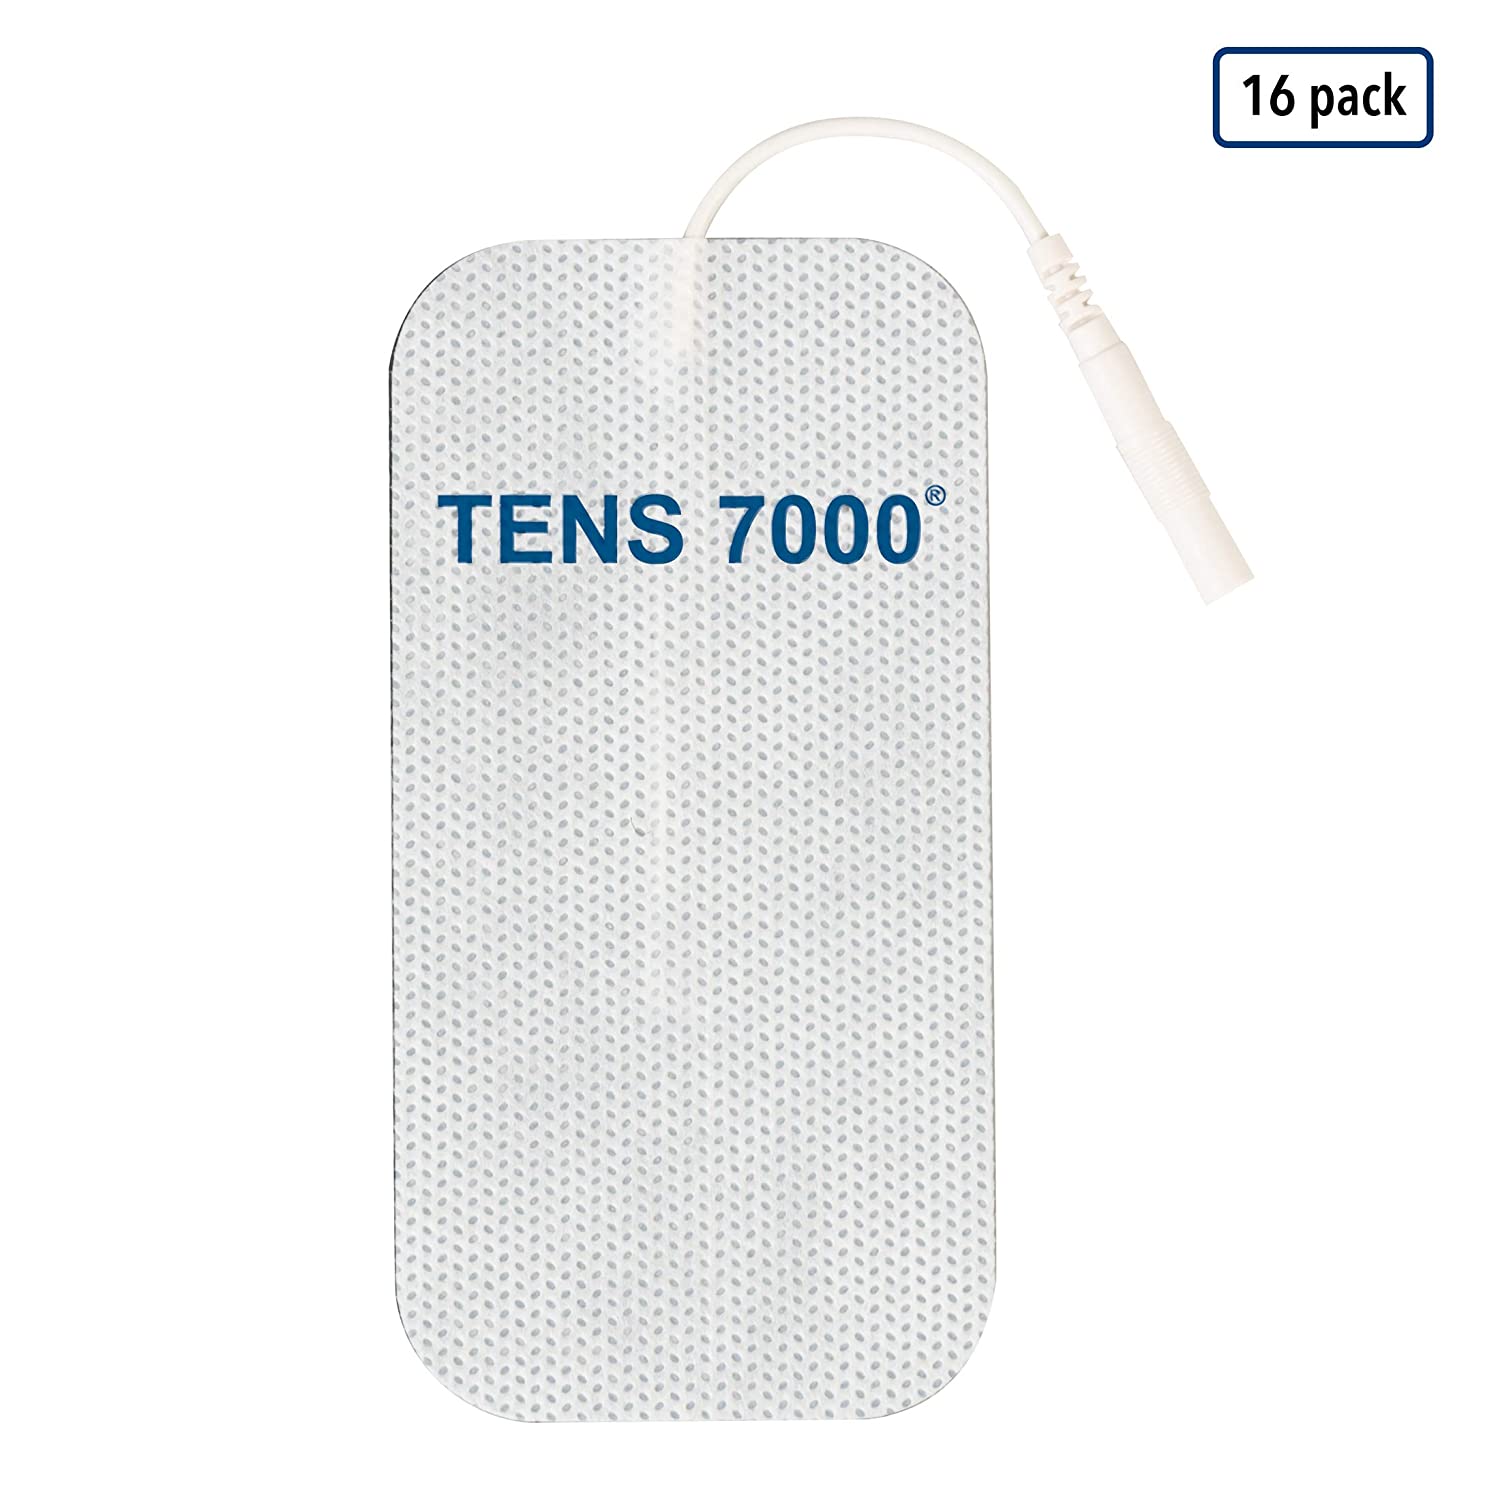 TENS 7000 Electrode Pads - 16/48 Pack - 2 x 2 Replacement Pads